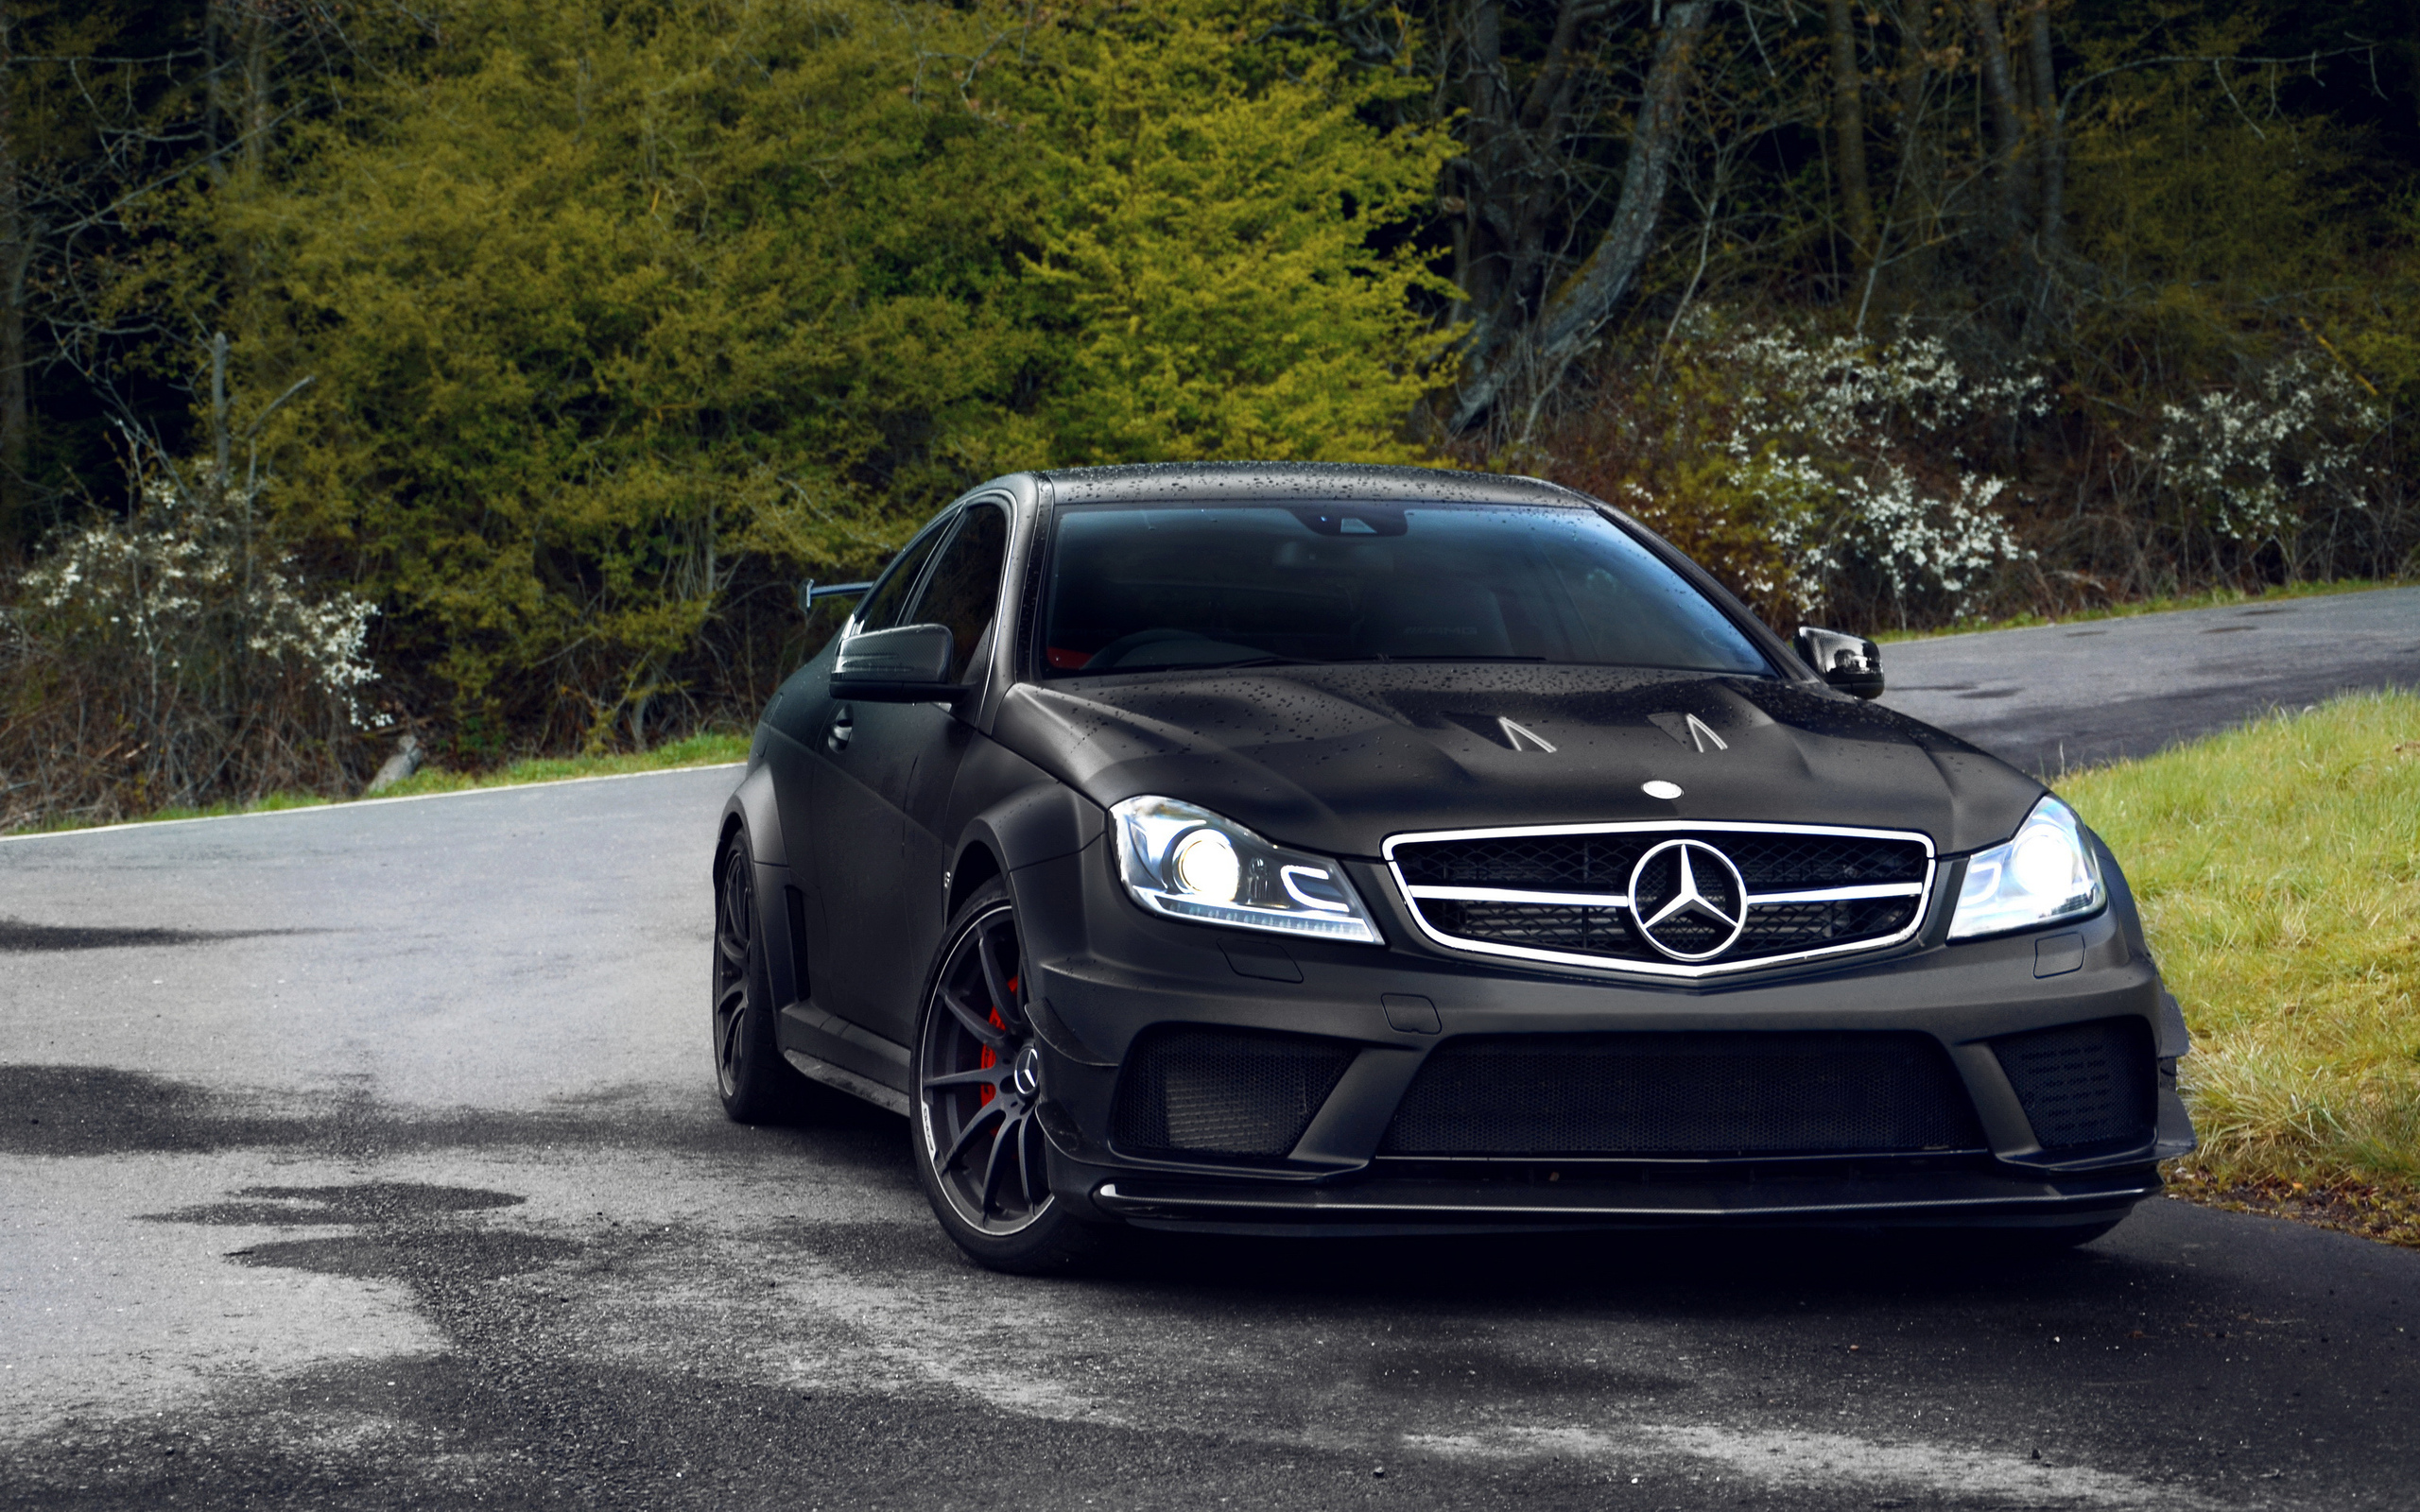 Mercedes Benz C63 Amg Edition In Wallpaper Collections